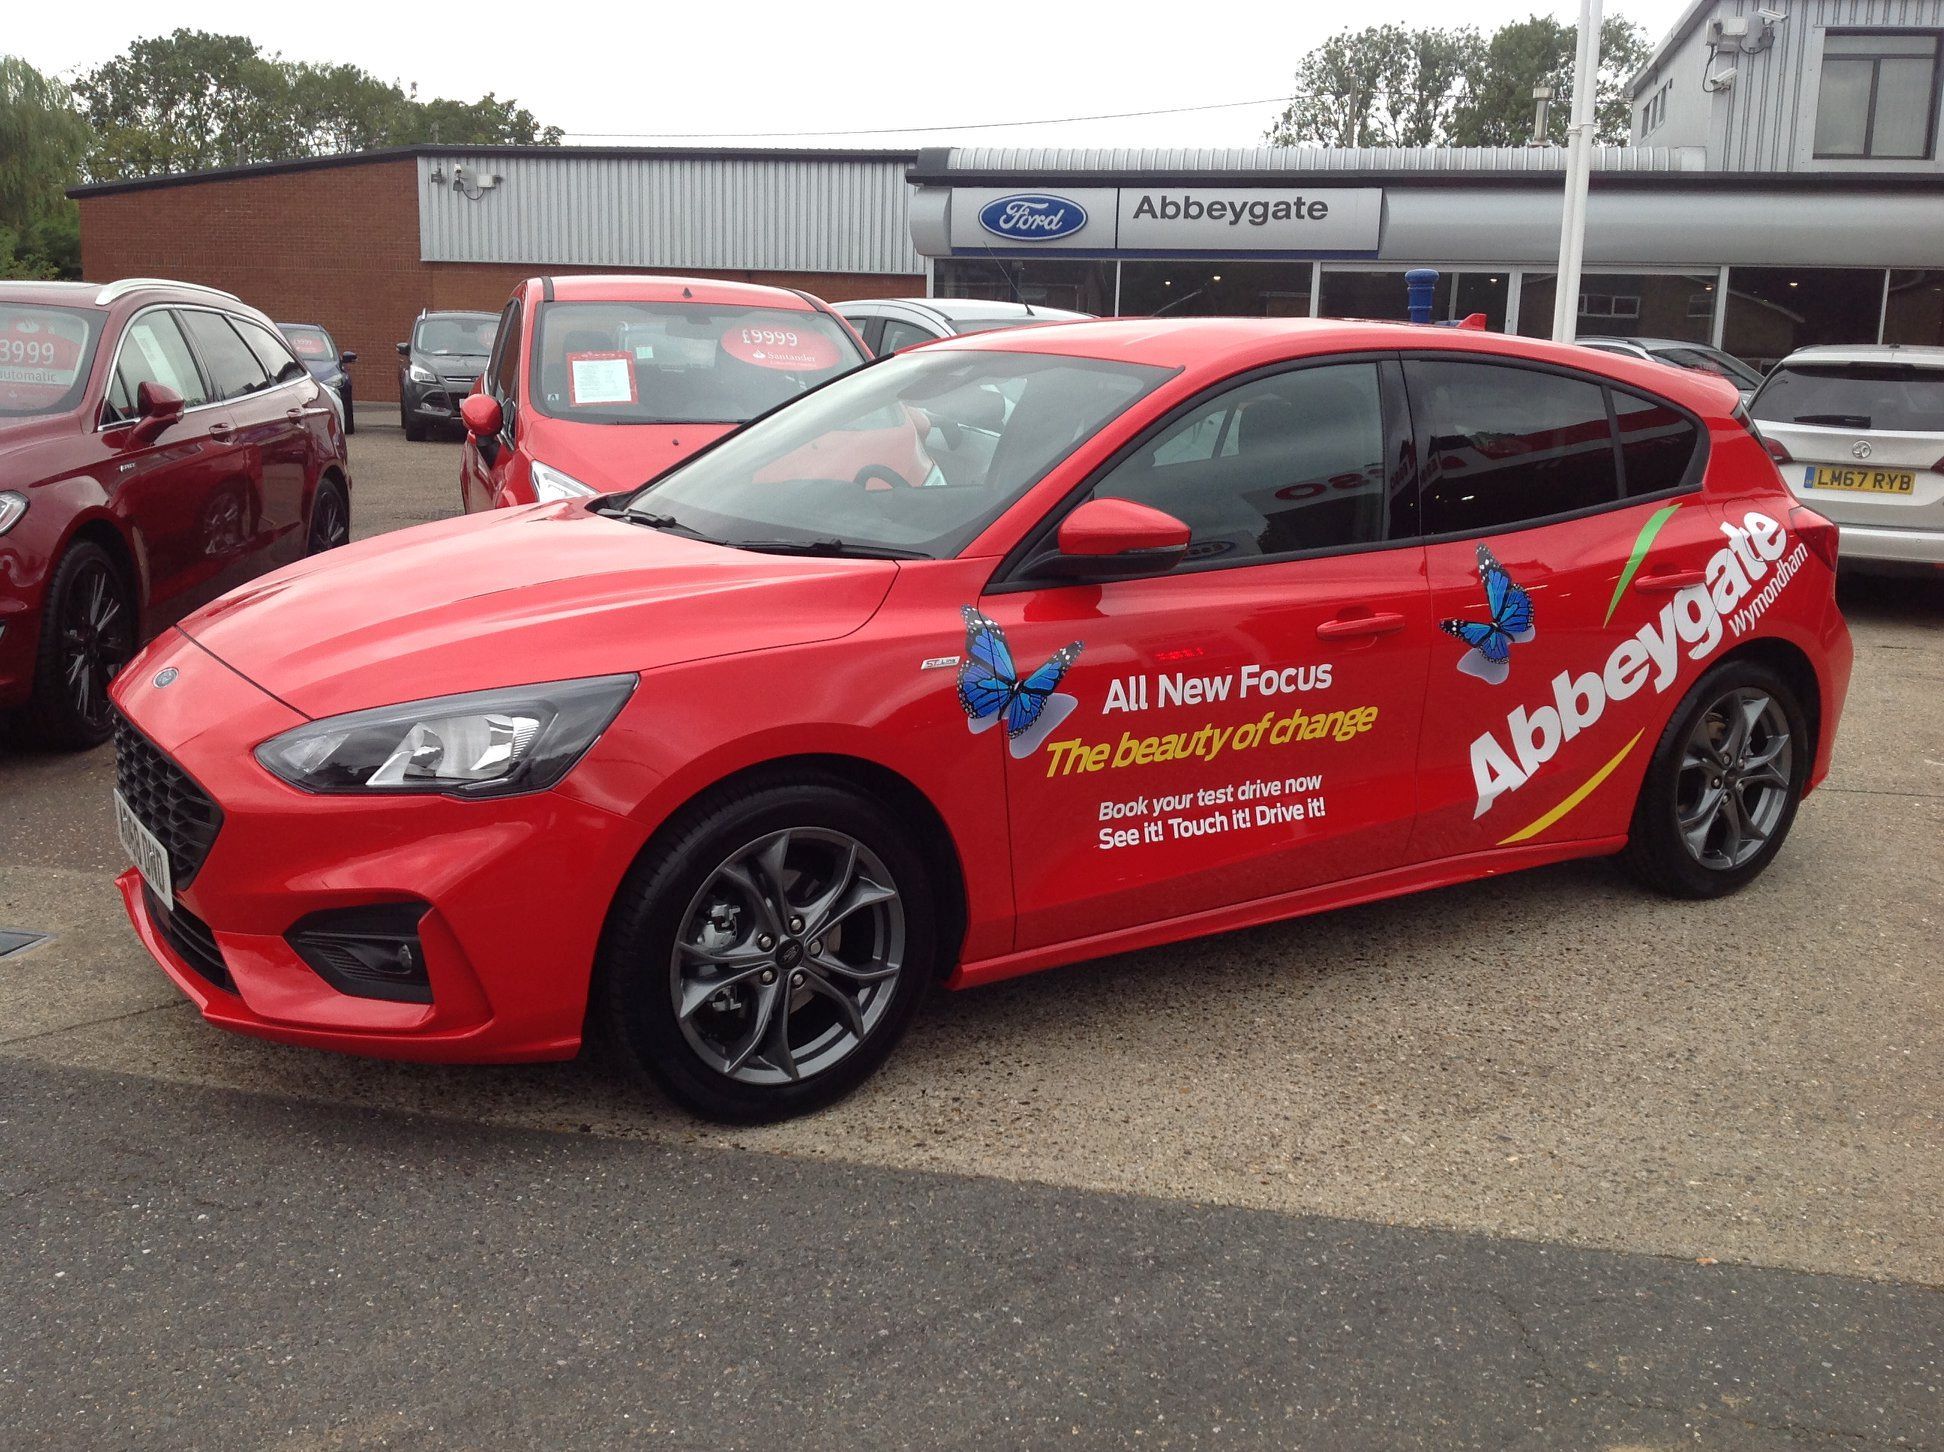 Take a look at our All-New Focus demonstrator!